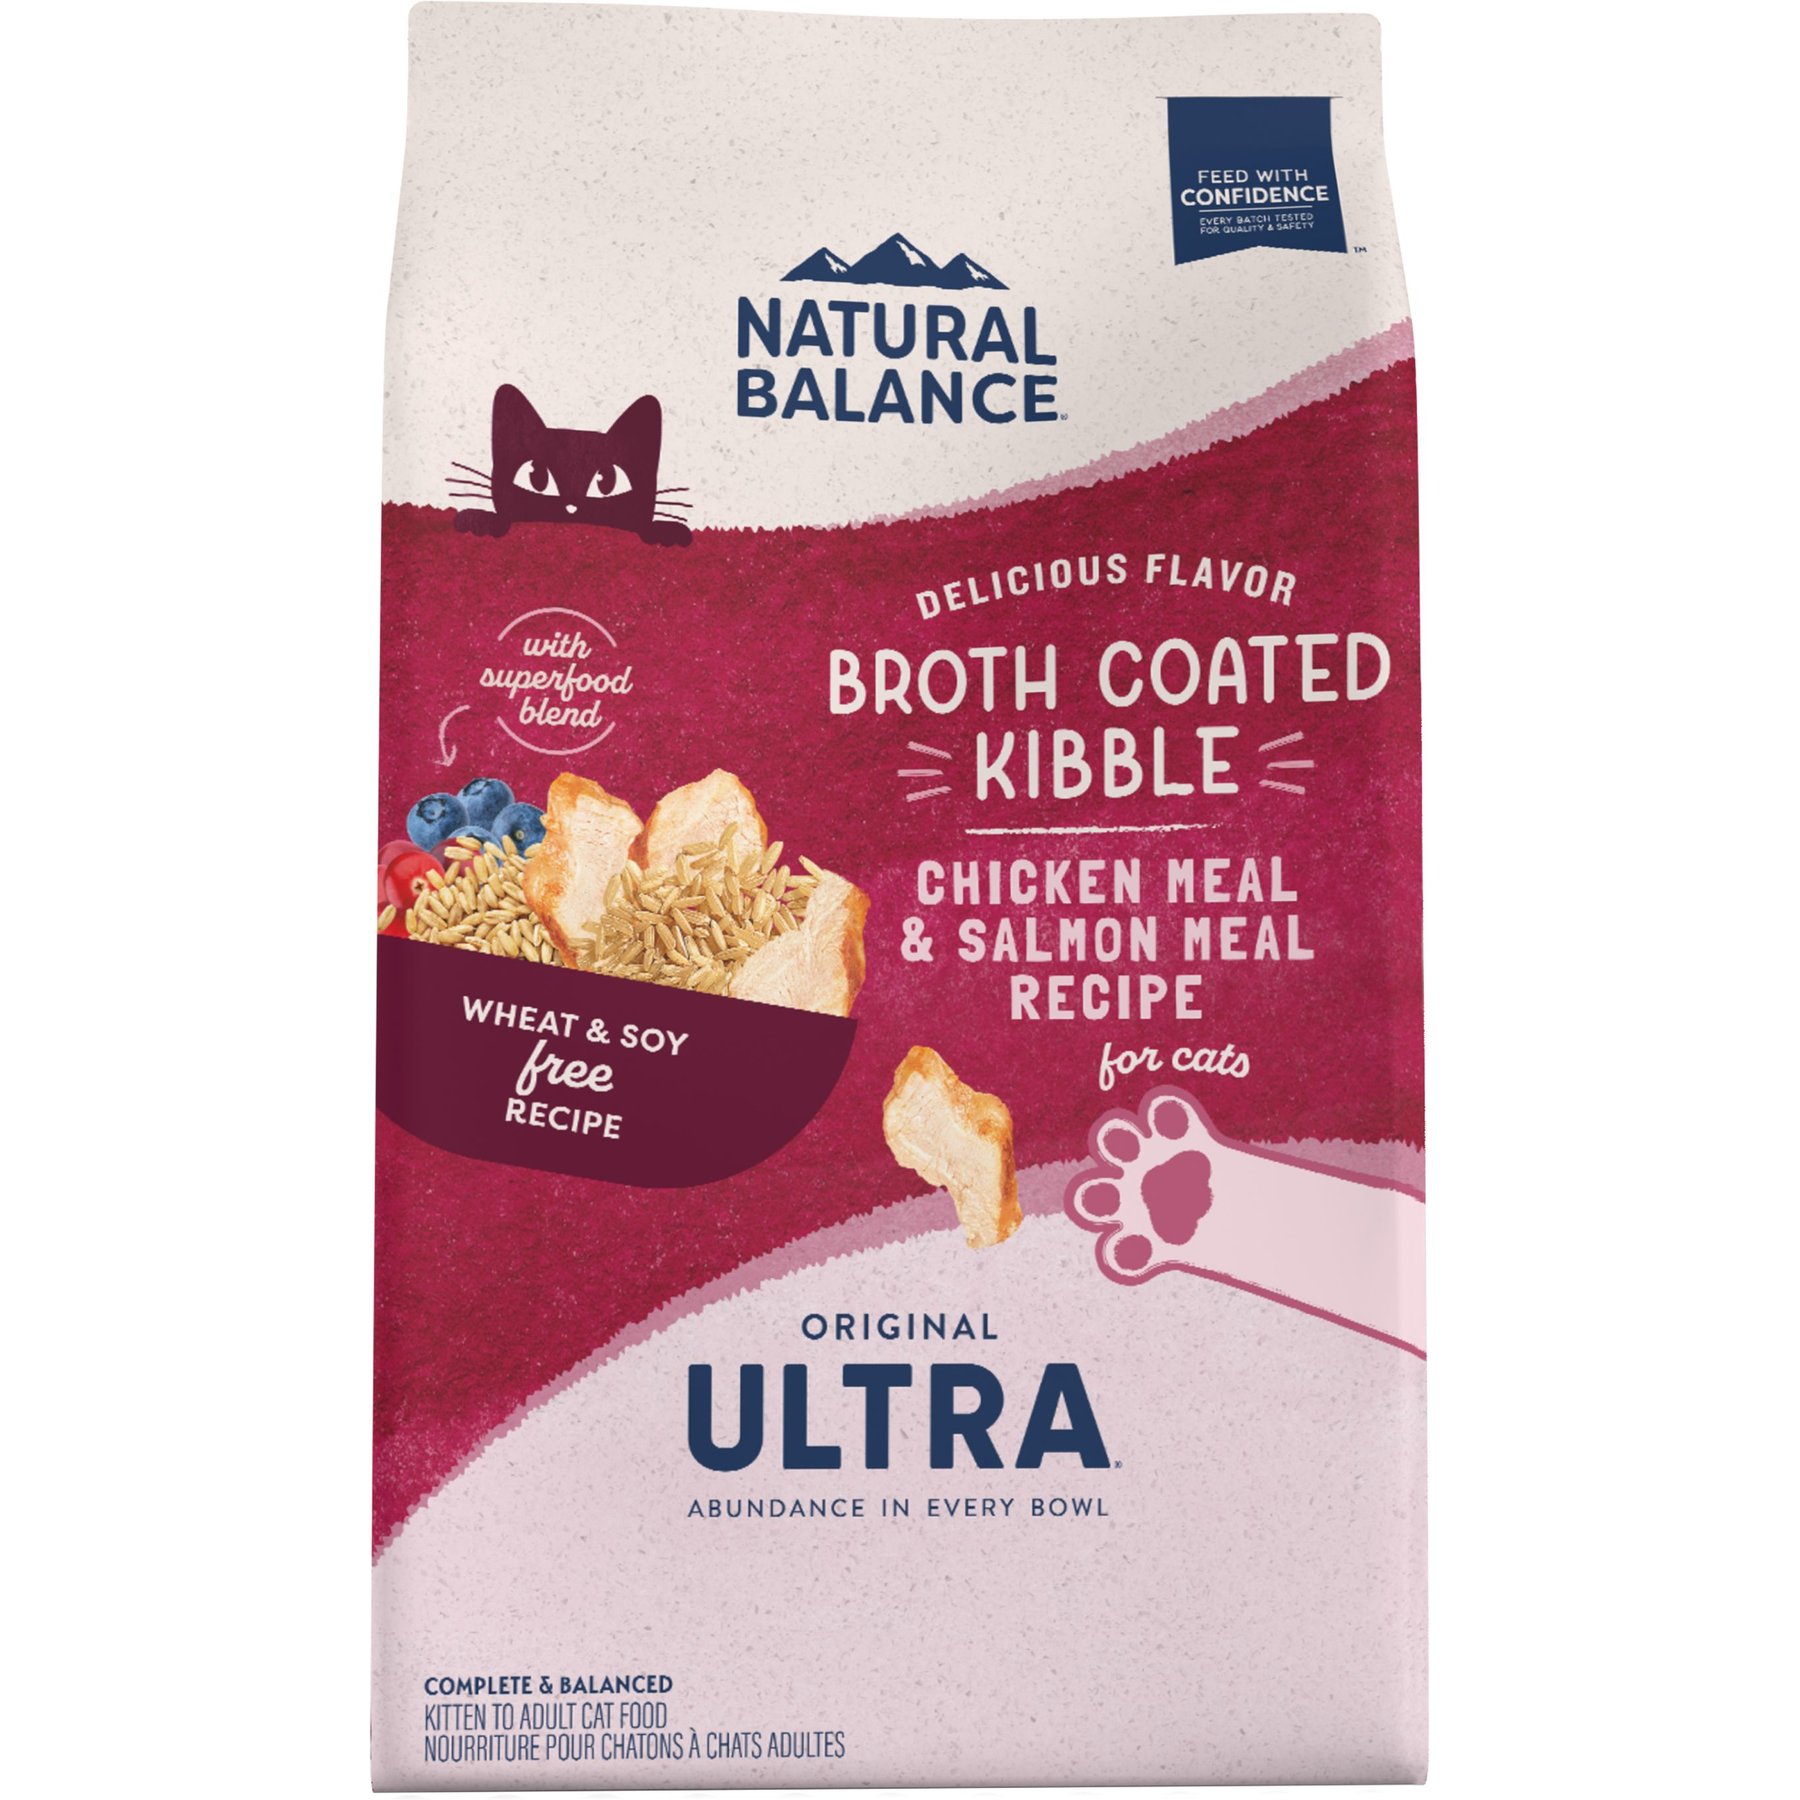 Ultra Premium Anxiety Relief - Crystal Peaks Nutrition